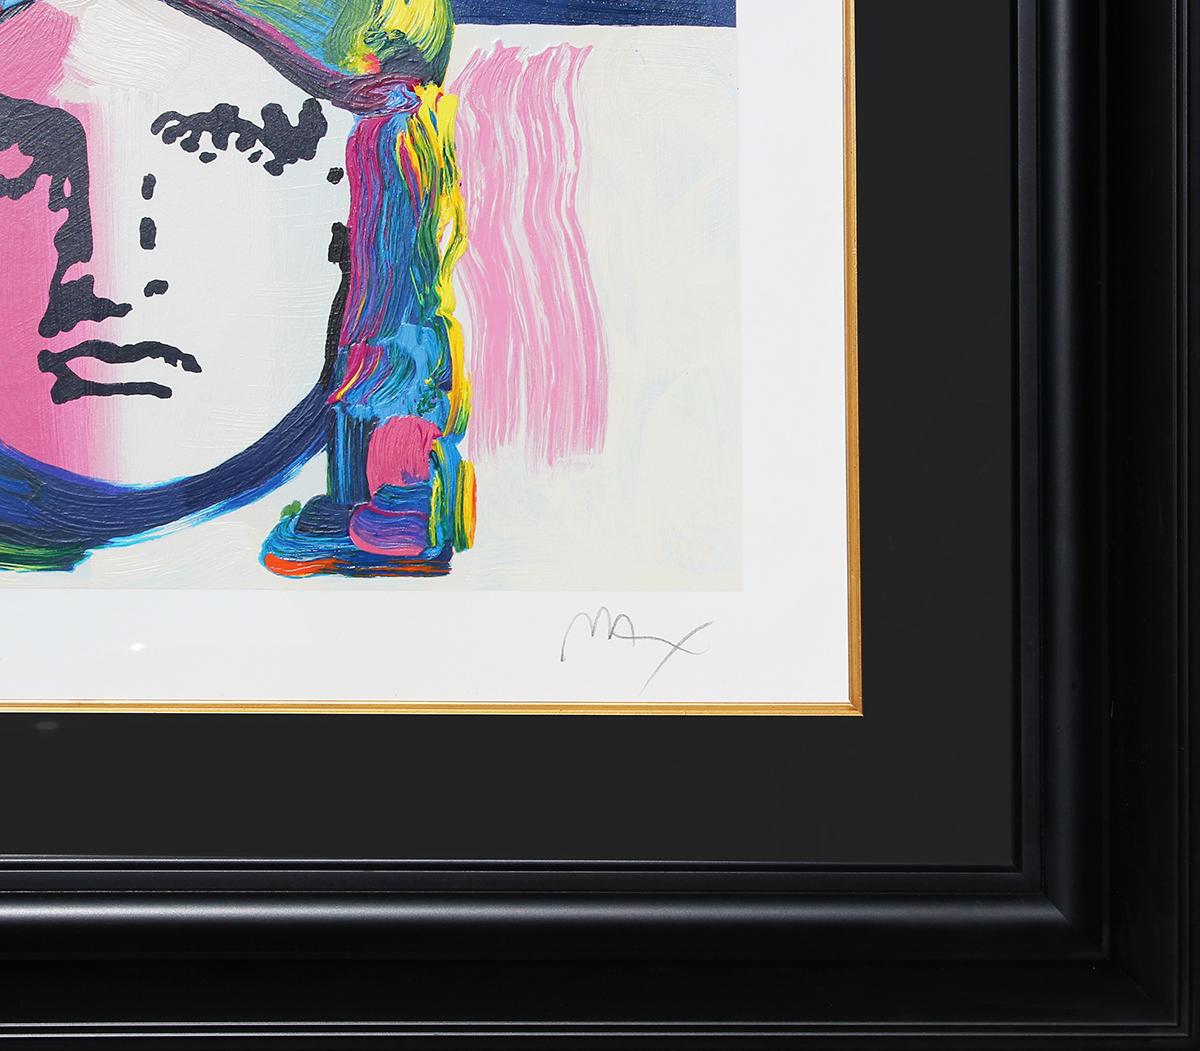 “Liberty Head” Colorful Pop Culture Abstract Serigraph Edition 204/350 - Pop Art Print by Peter Max